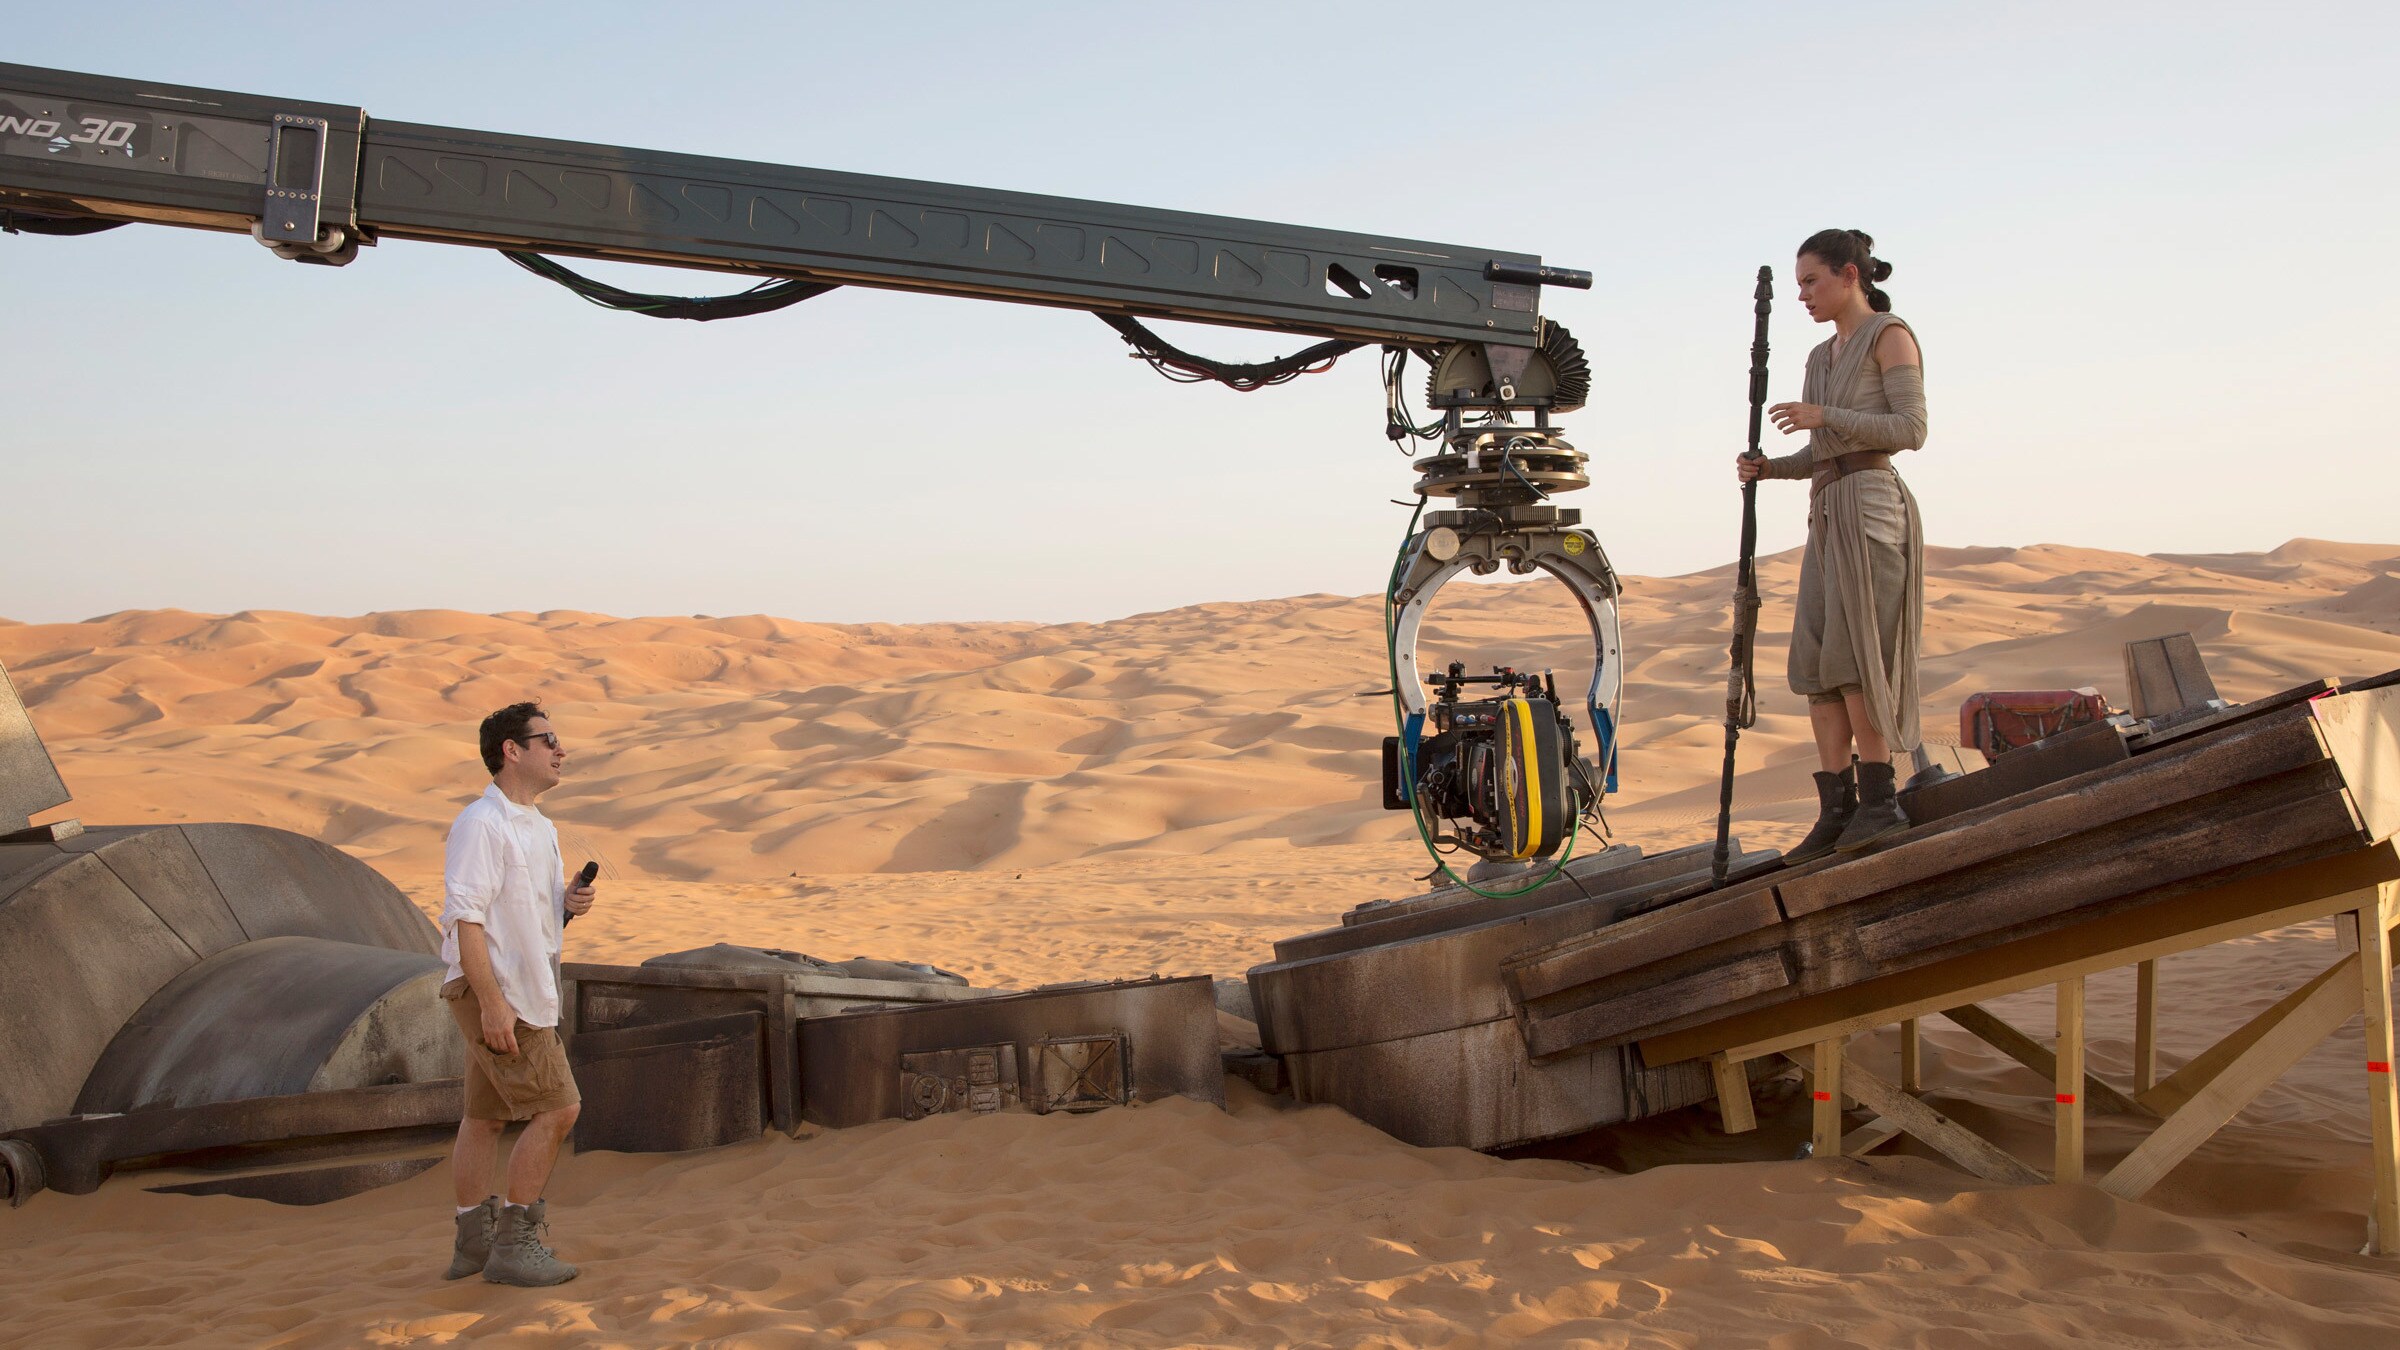 Star Wars: The Force Awakens to be Mastered in Dolby Vision and Dolby Atmos